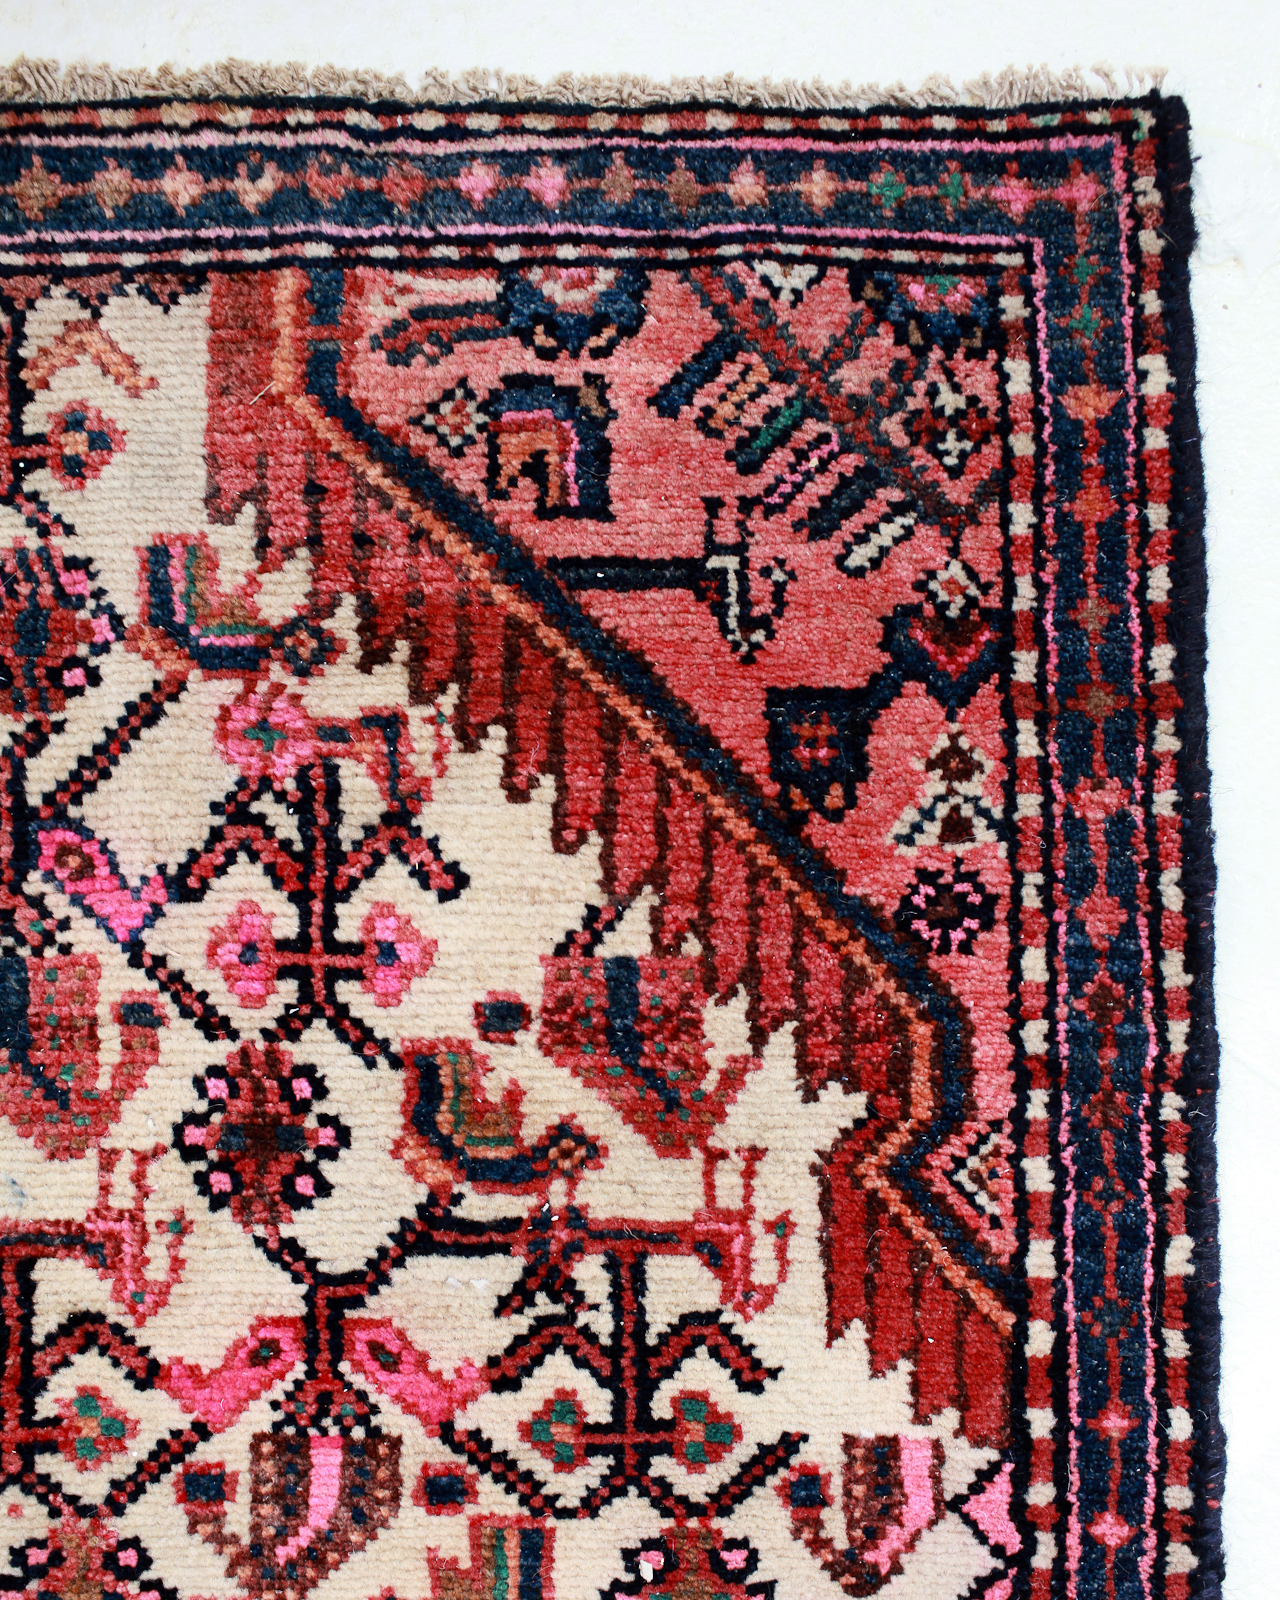 How to Find the Perfect Vintage Rug from eBay